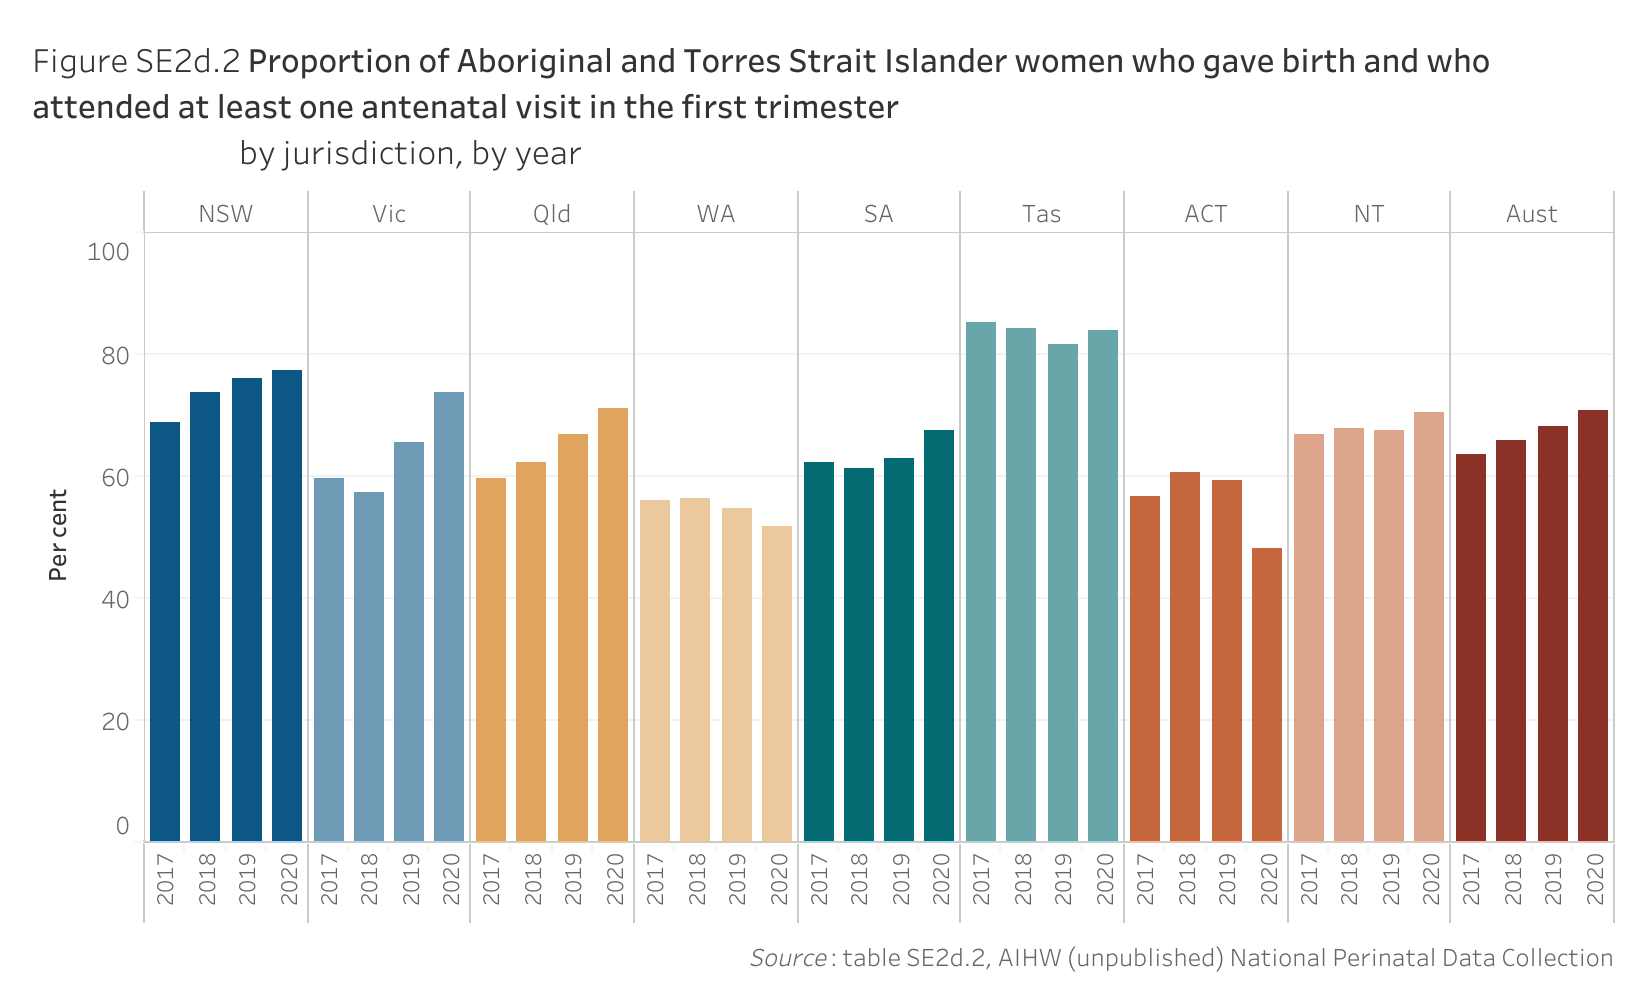 Figure SE2d.2 shows the proportion of Aboriginal and Torres Strait Islander women who gave birth and who attended at least one antenatal visit in the first trimester, by jurisdiction, by year. More details can be found within the text near this image.